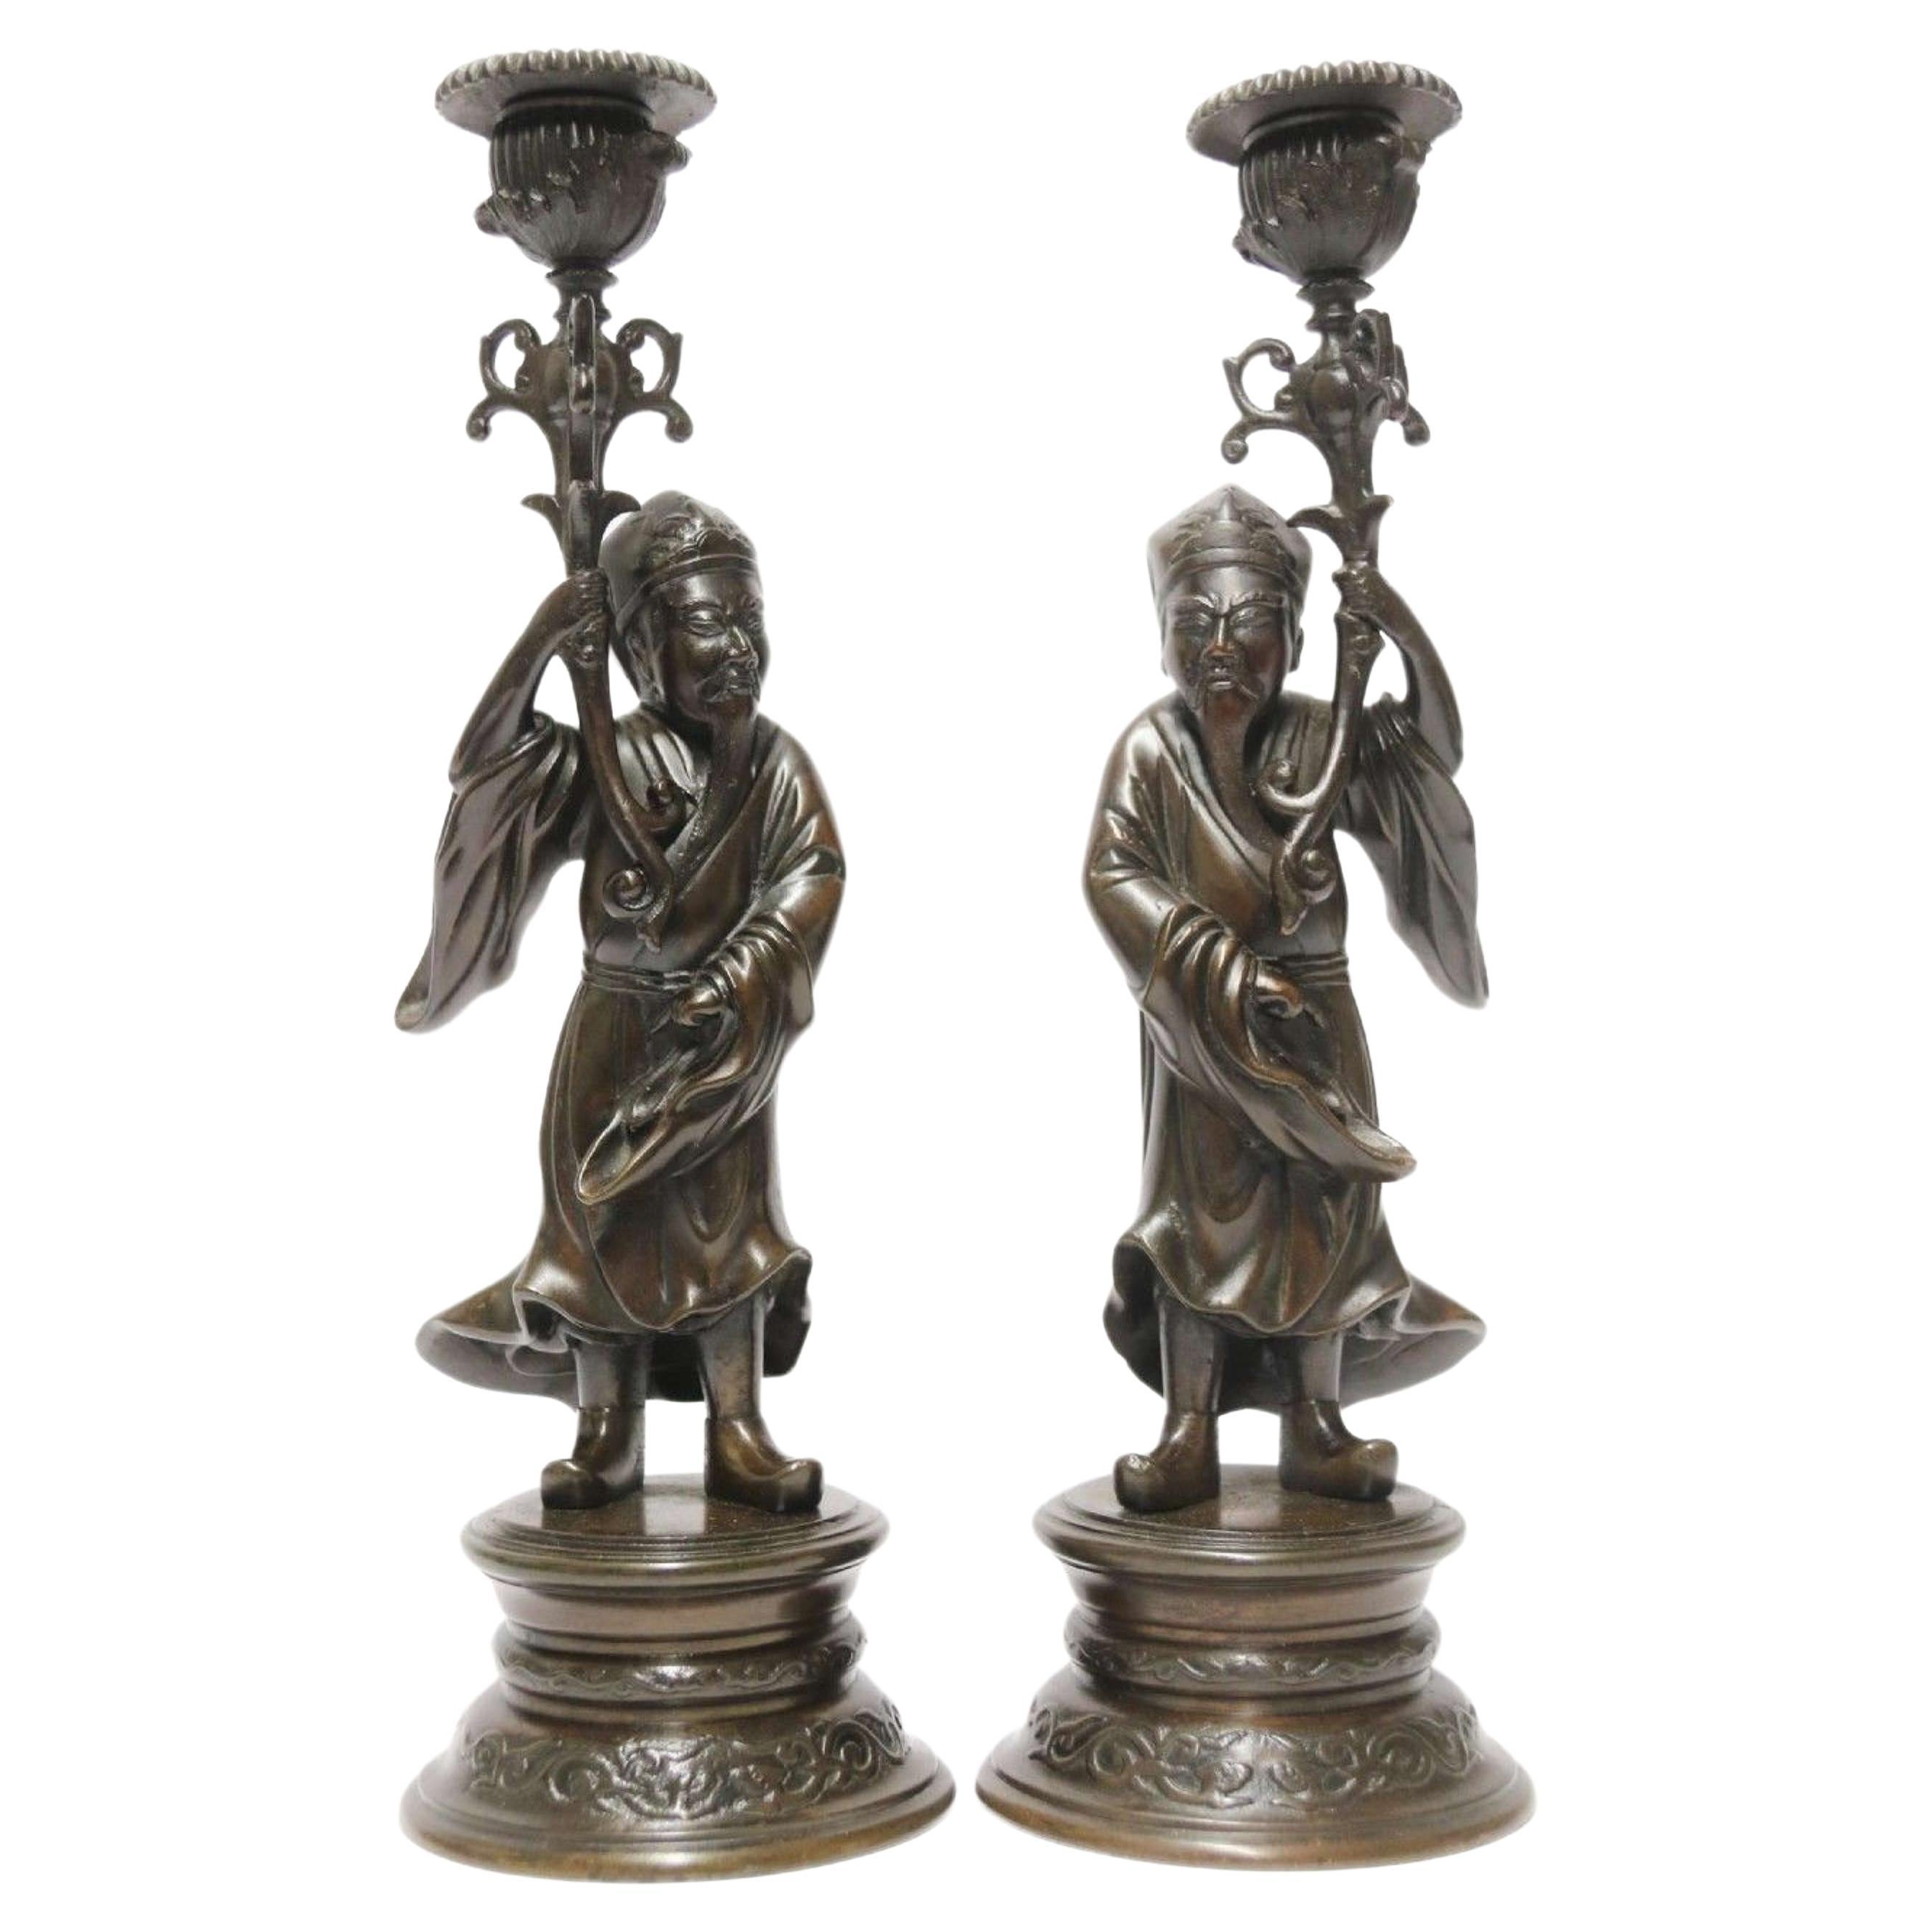 Pair of 19th C French Bronze Candlesticks in the Form of Chinese Figures C 1870